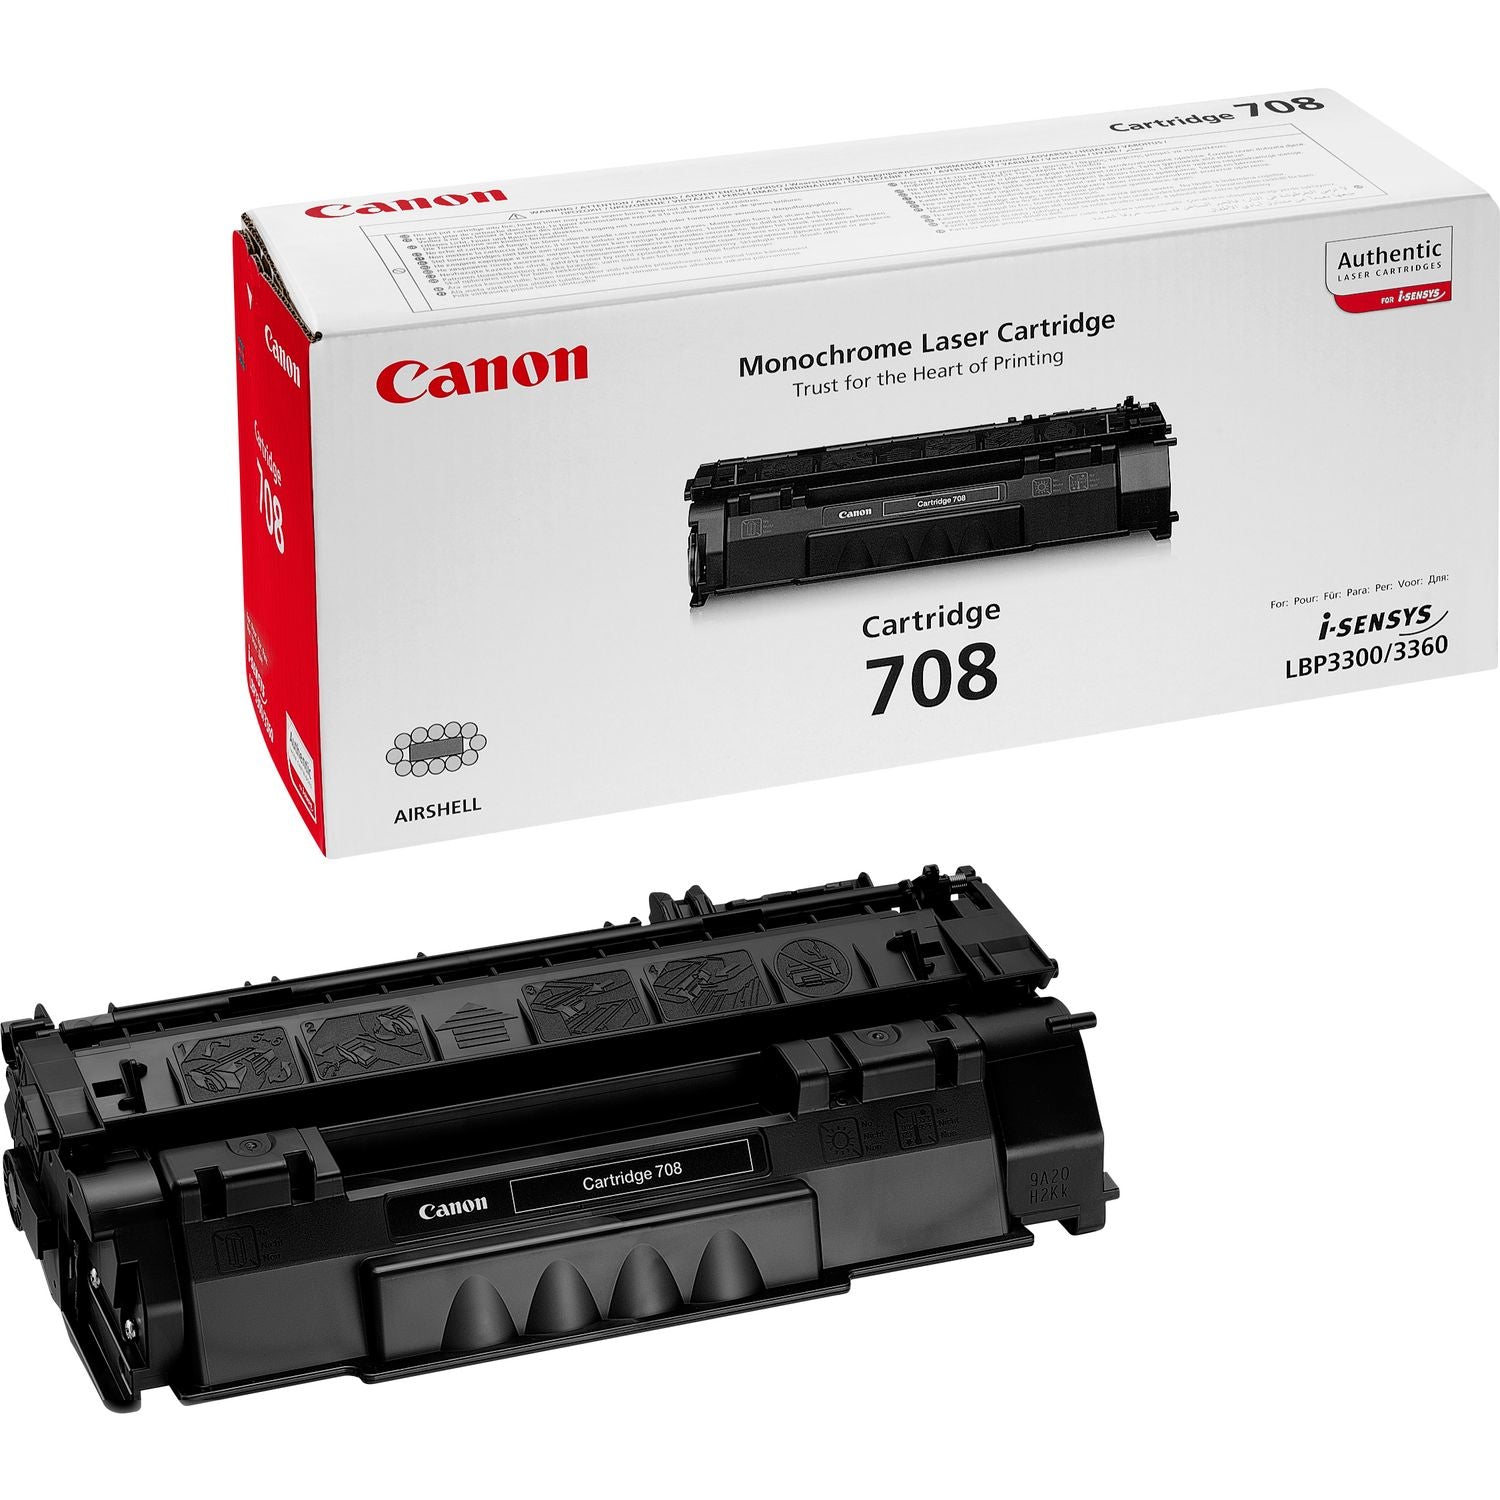 Canon 0266B002/708 Toner cartridge black, 2.5K pages ISO/IEC 19752 for Canon LBP-3300